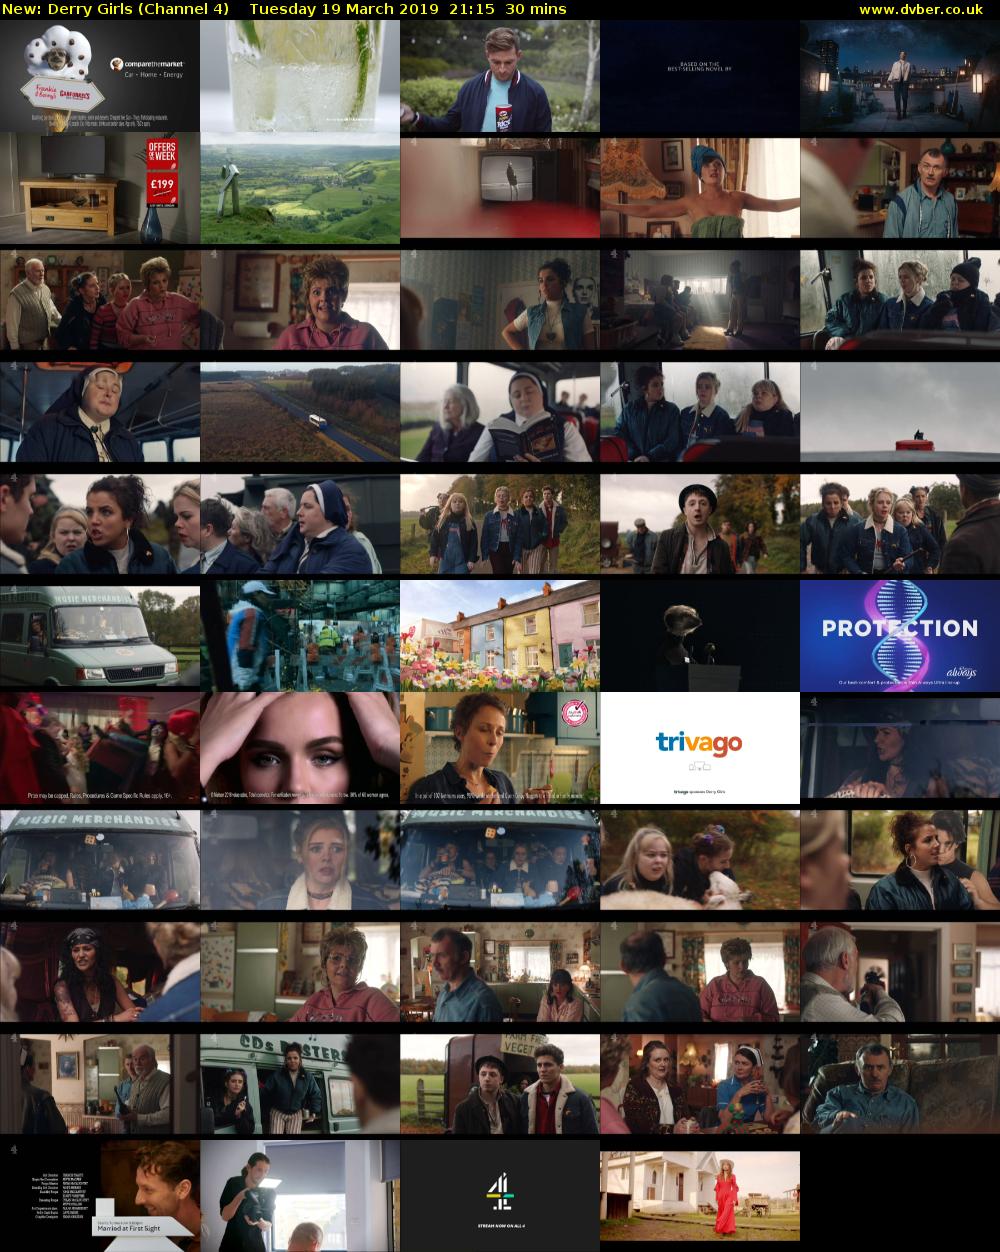 Derry Girls (Channel 4) Tuesday 19 March 2019 21:15 - 21:45